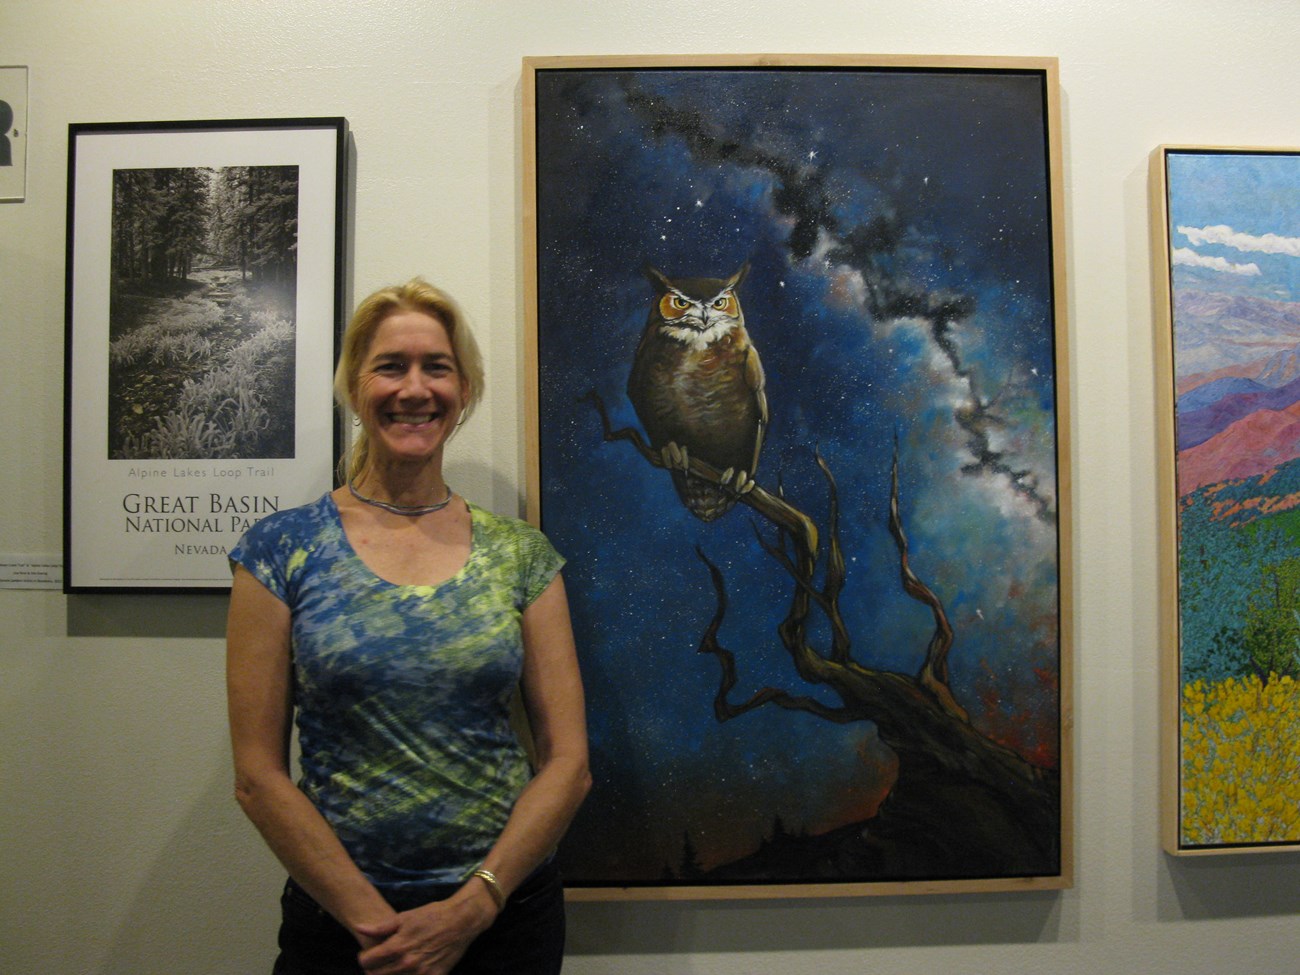 A smiling woman stands next to a painting of an owl sitting on a tree branch with the milky way behind it. The woman stands with hands clasped in front of her, smiling at the camera with pride.